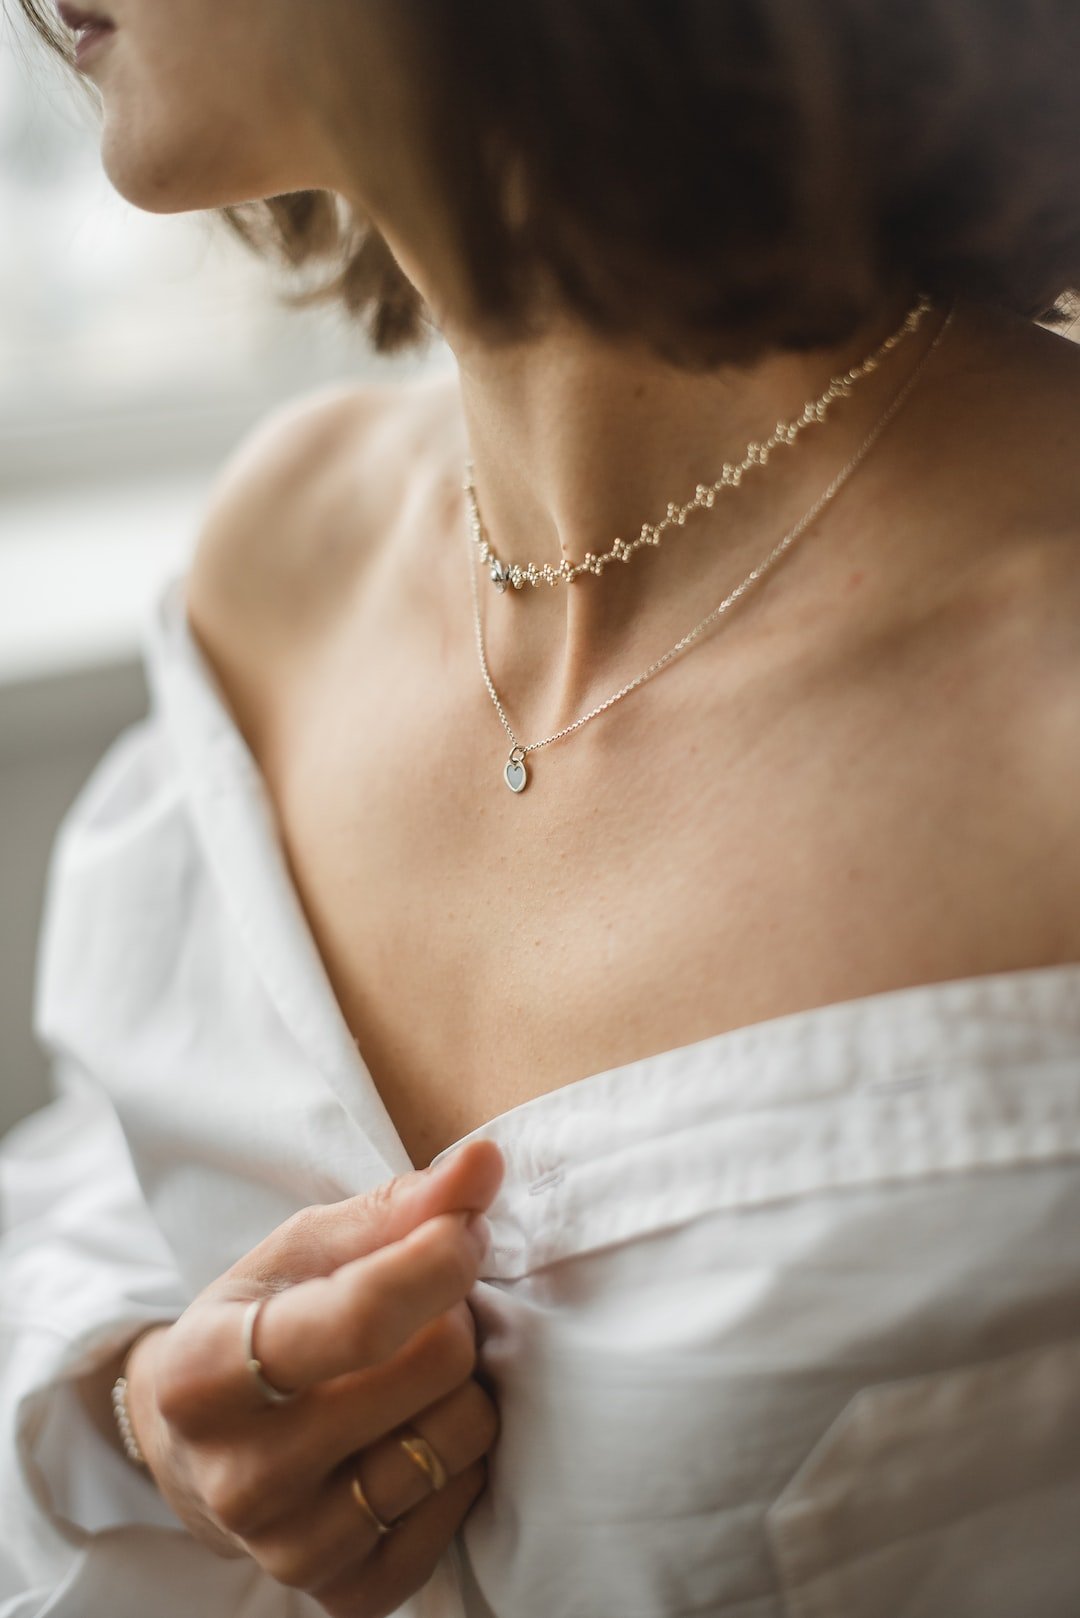 Jewelry for Different Personalities: Minimalists, Romantics, and Trendsetters - TI.CO